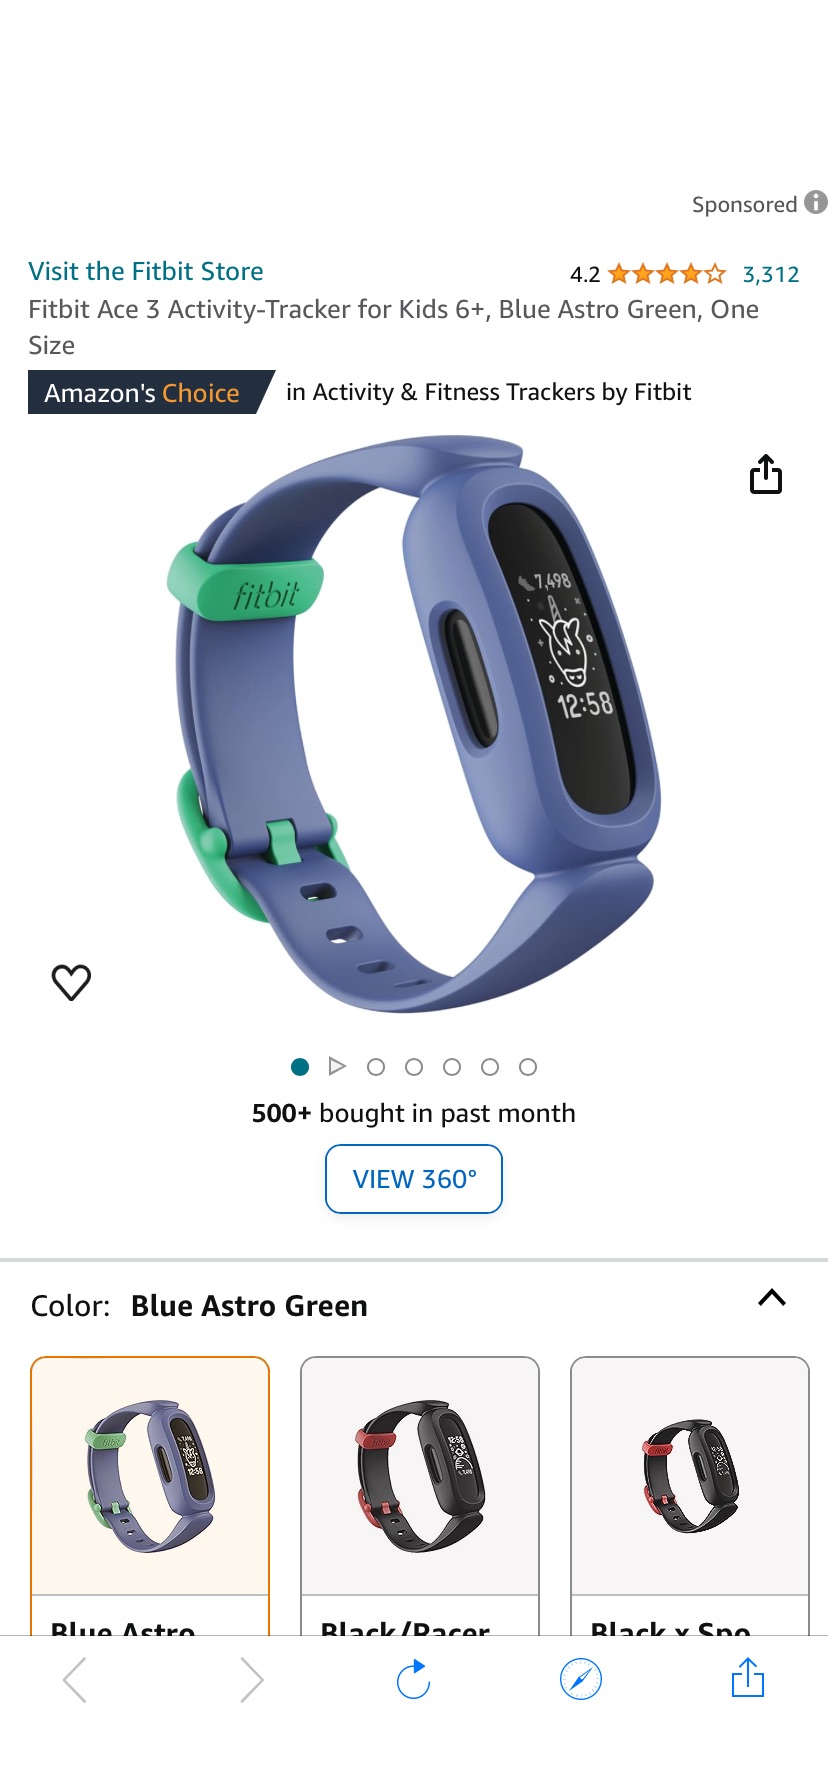 Amazon.com: Fitbit Ace 3 Activity-Tracker for Kids 6+, Blue Astro Green, One Size : Sports & Outdoors